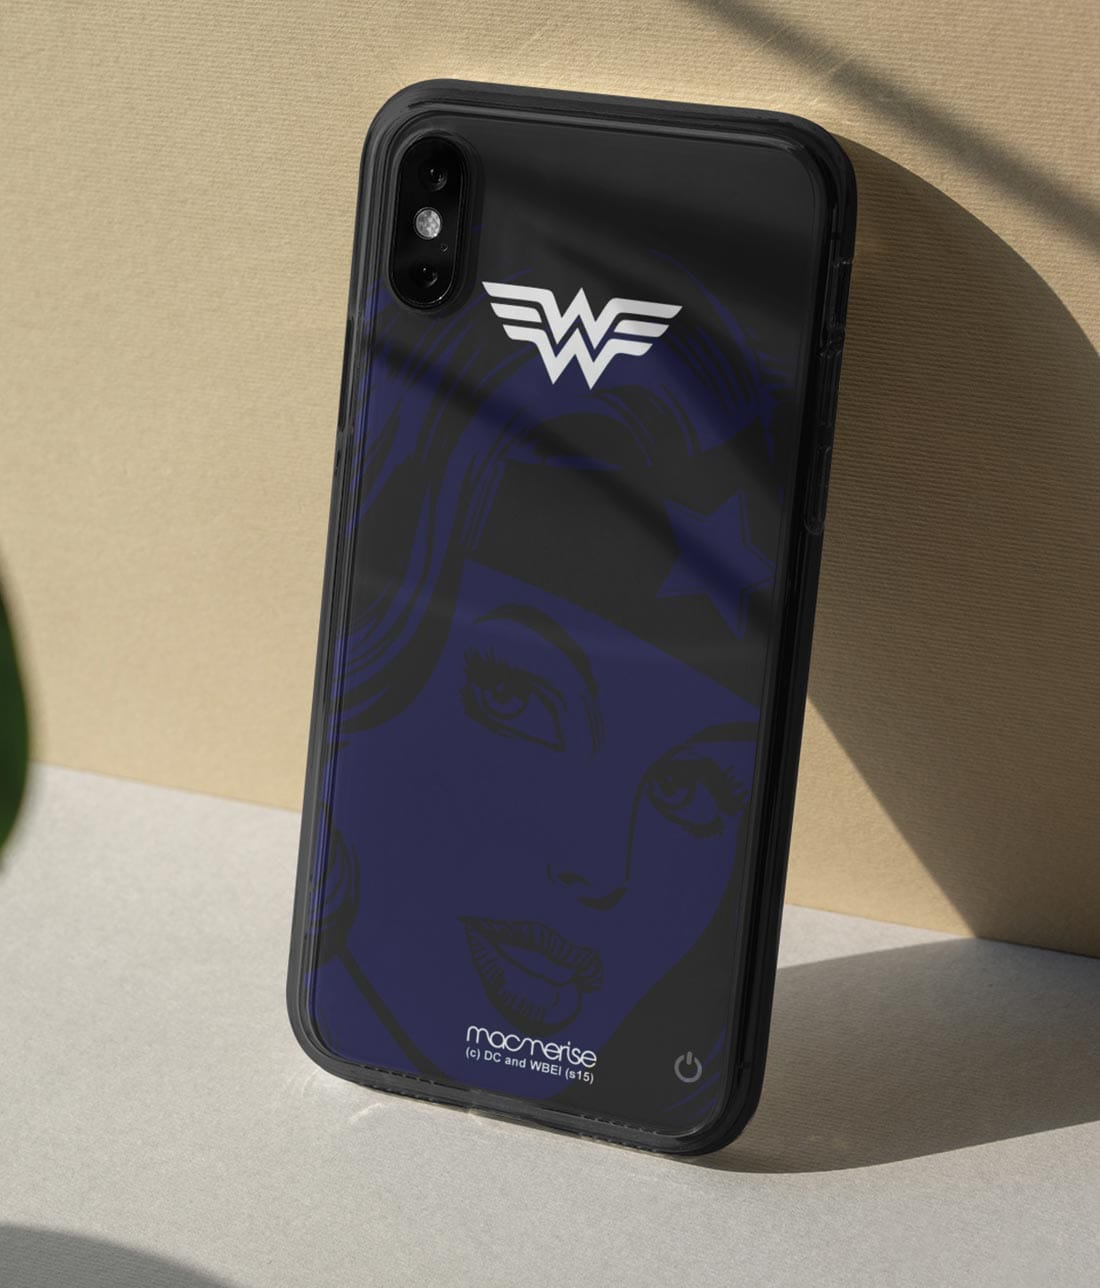 Silhouette Wonder Woman - Lumous LED Phone Case for iPhone XS Max